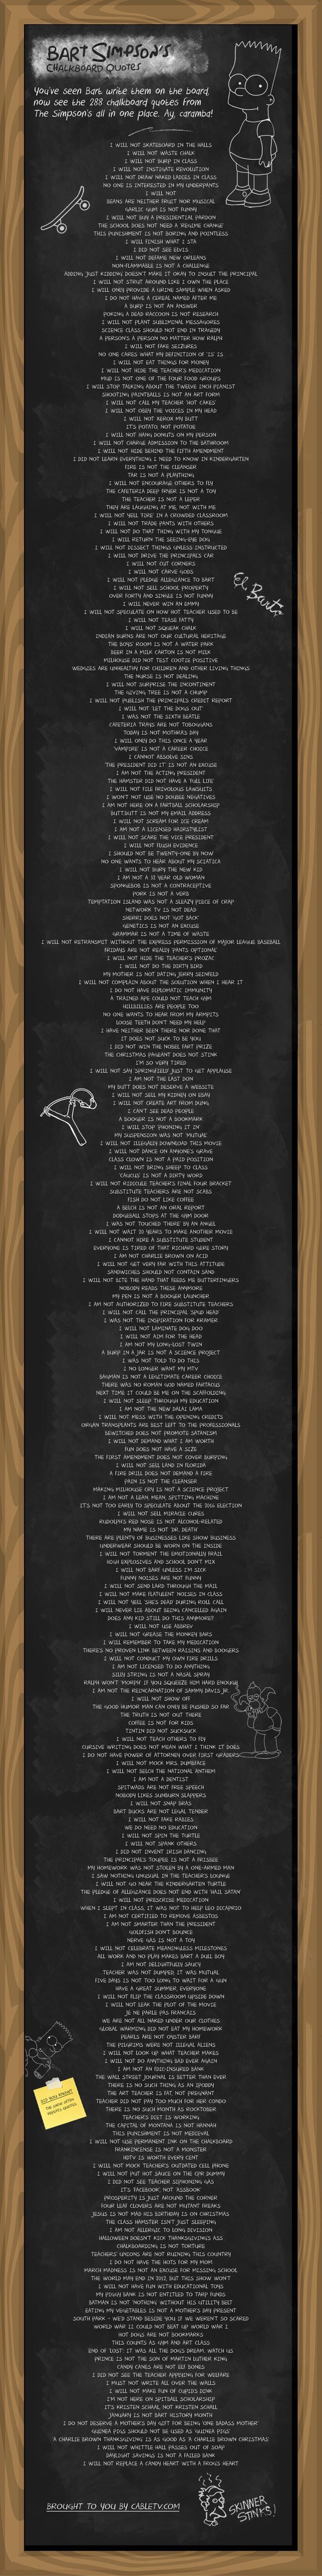 Every Bart Simpson Chalkboard Quote Ever (1 pic)